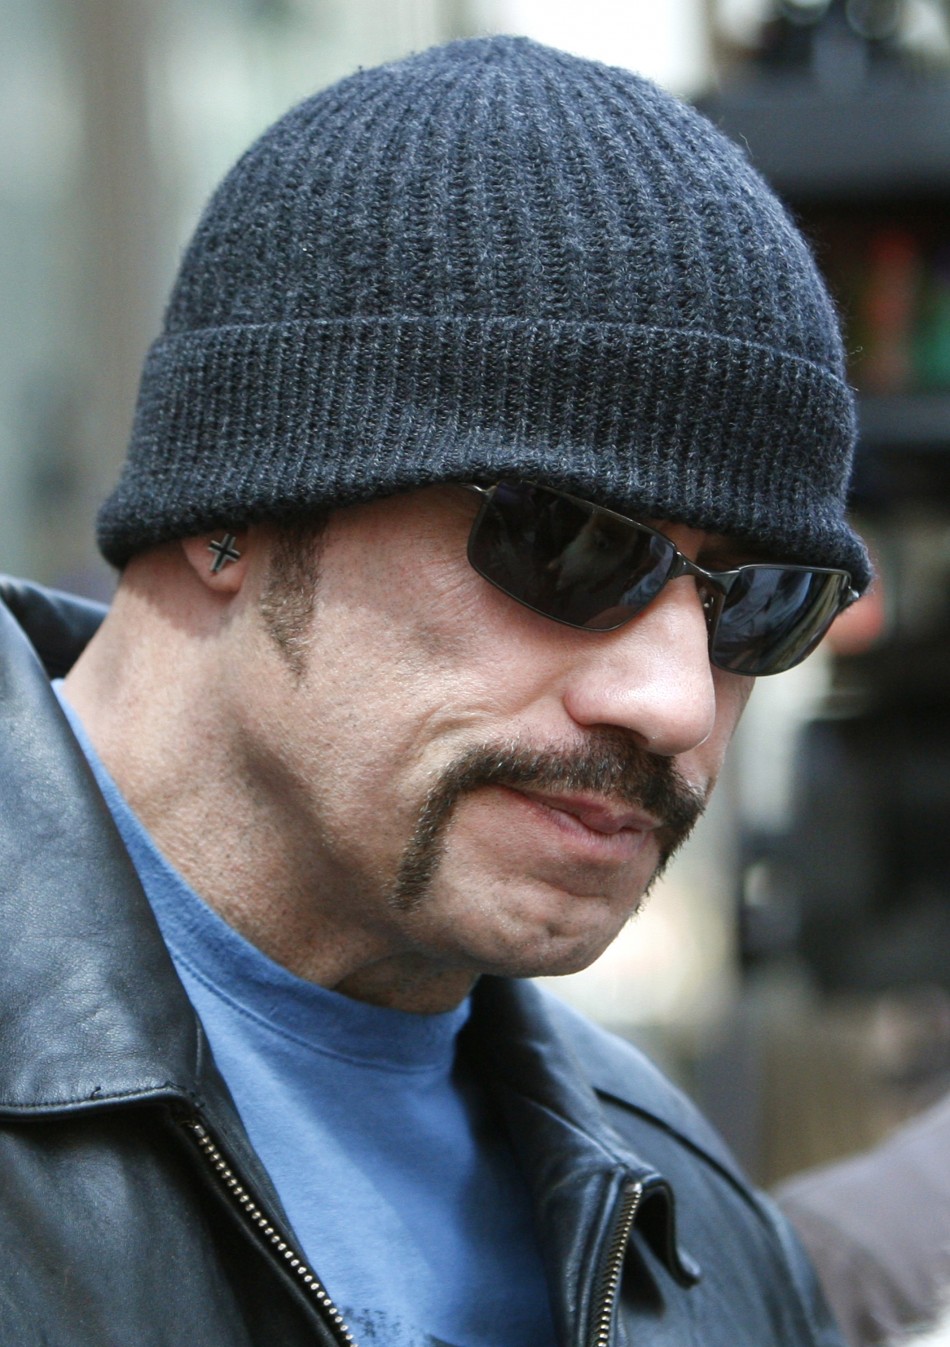 Actor John Travolta, dressed as his character Ryder